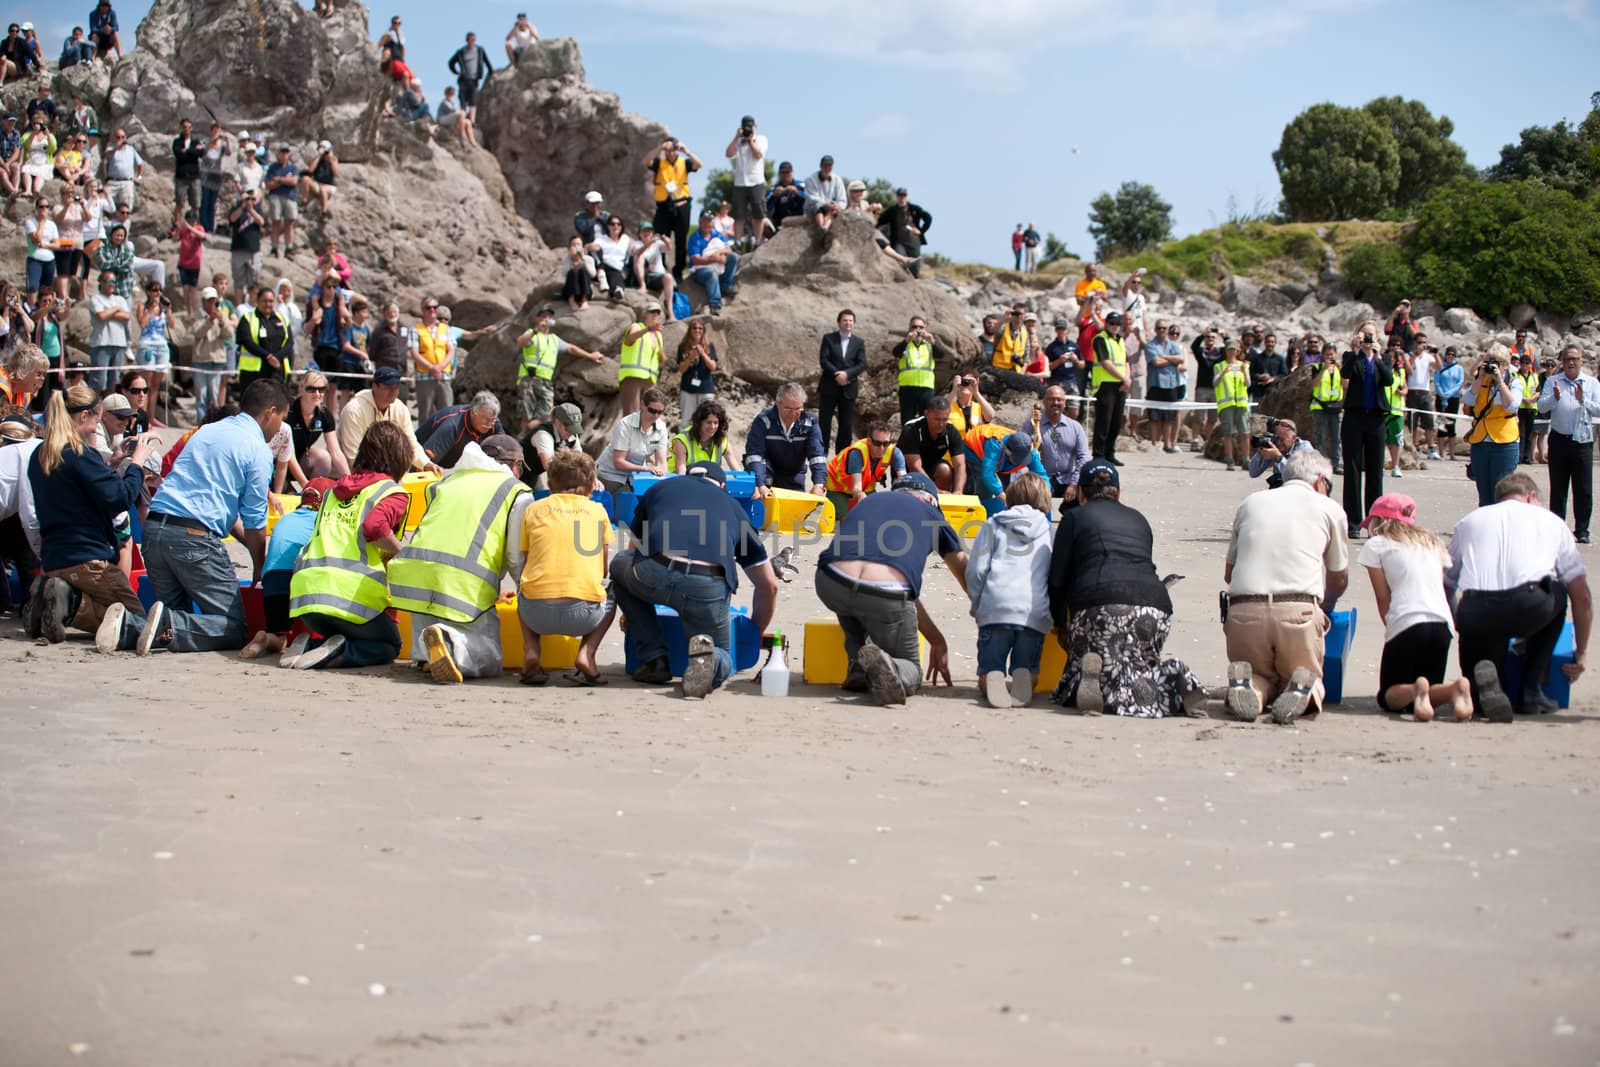 Tauranga, New Zealand - November 22, 2011: Members of WWF Response team, dignitories and public crouch by the boxes of penguins and start the release. The penguins were oiled following the wrecking of the ship Rena off the coast of Tauranga.